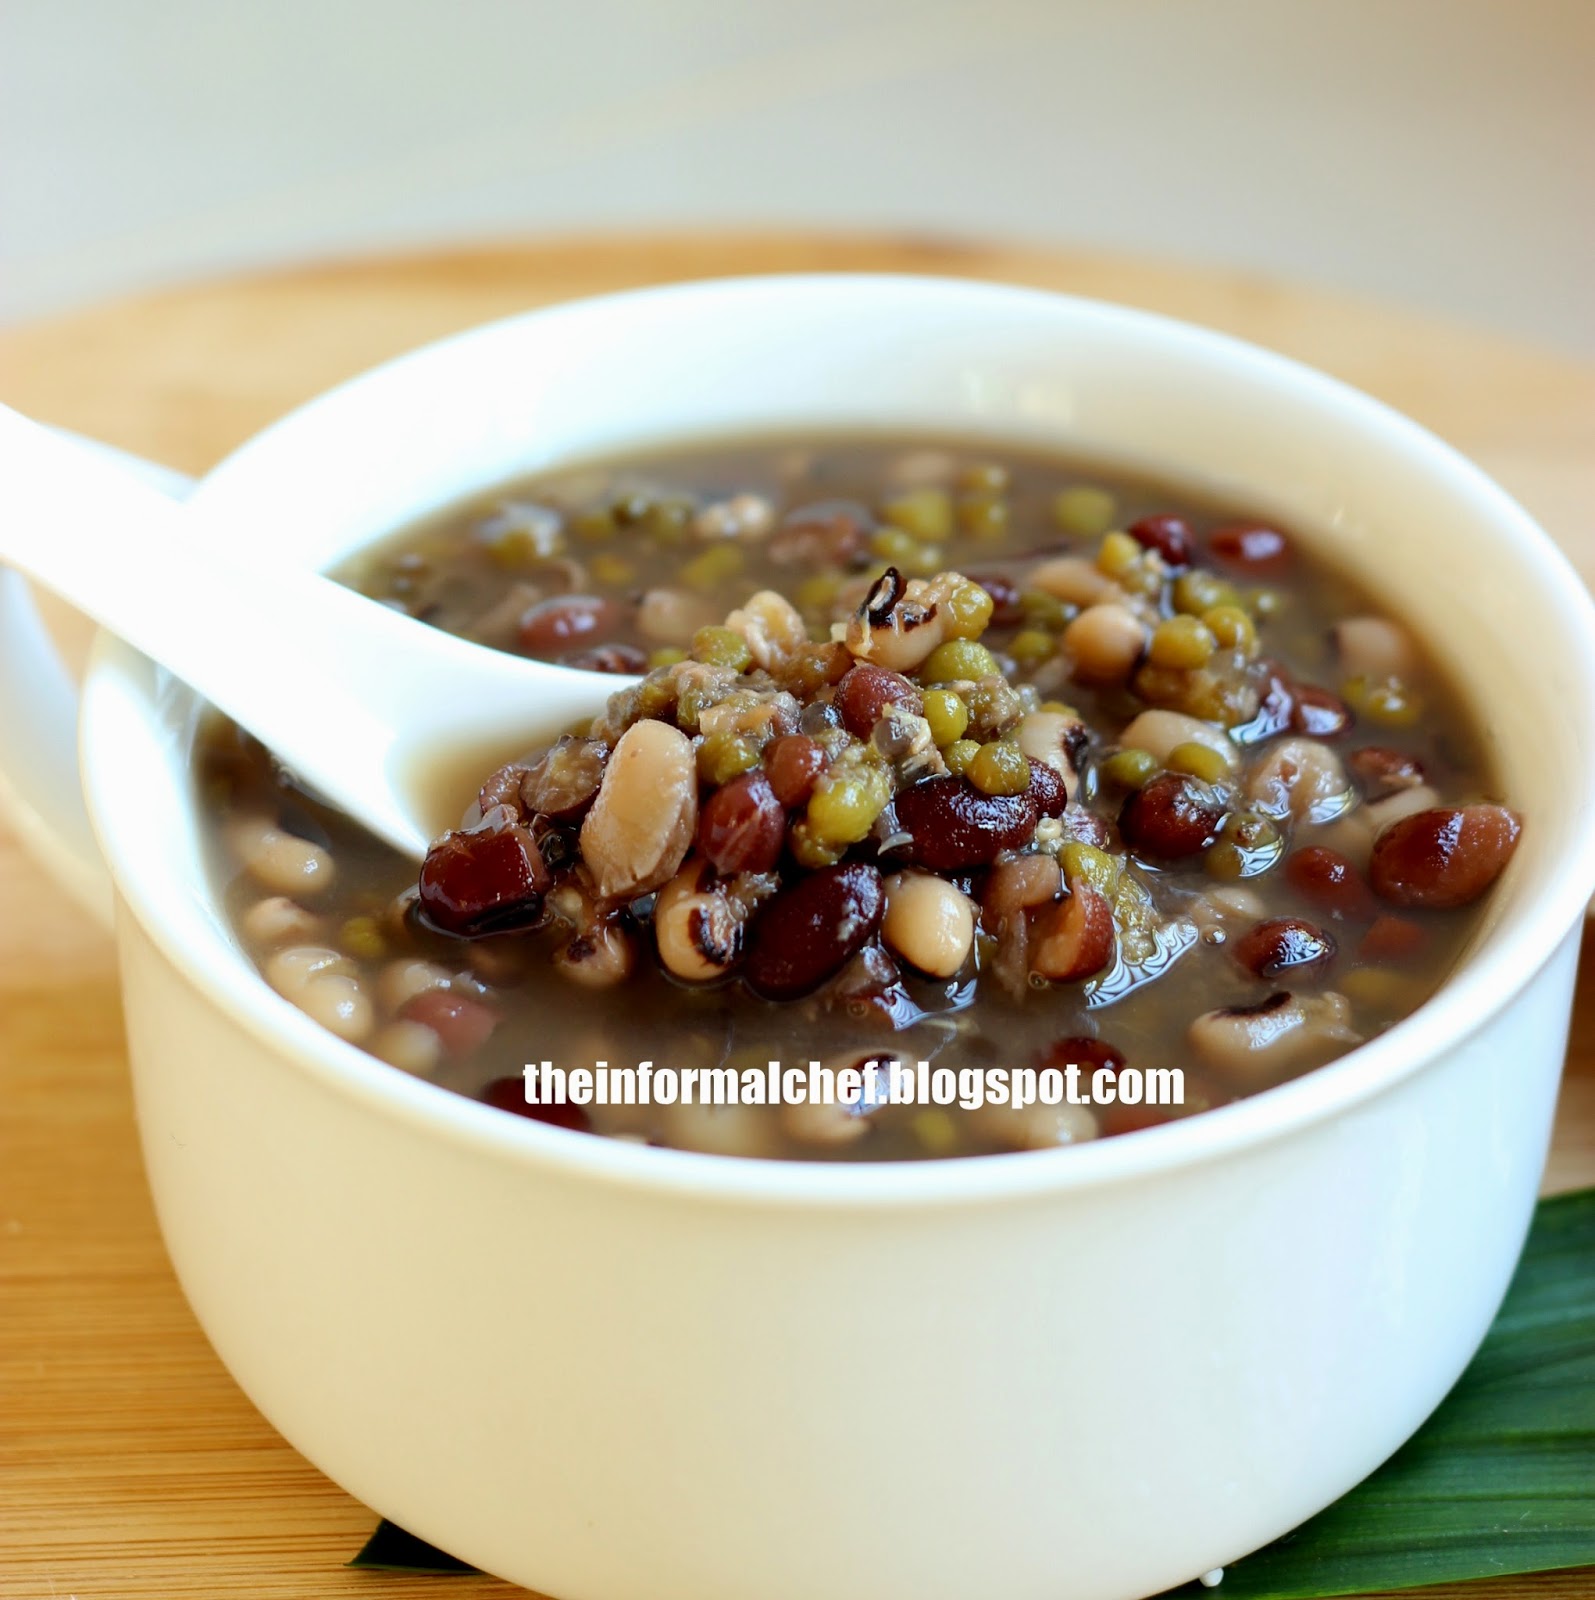 The Informal Chef: Beans Revisited - Chinese Mixed Beans Dessert 三豆塘水